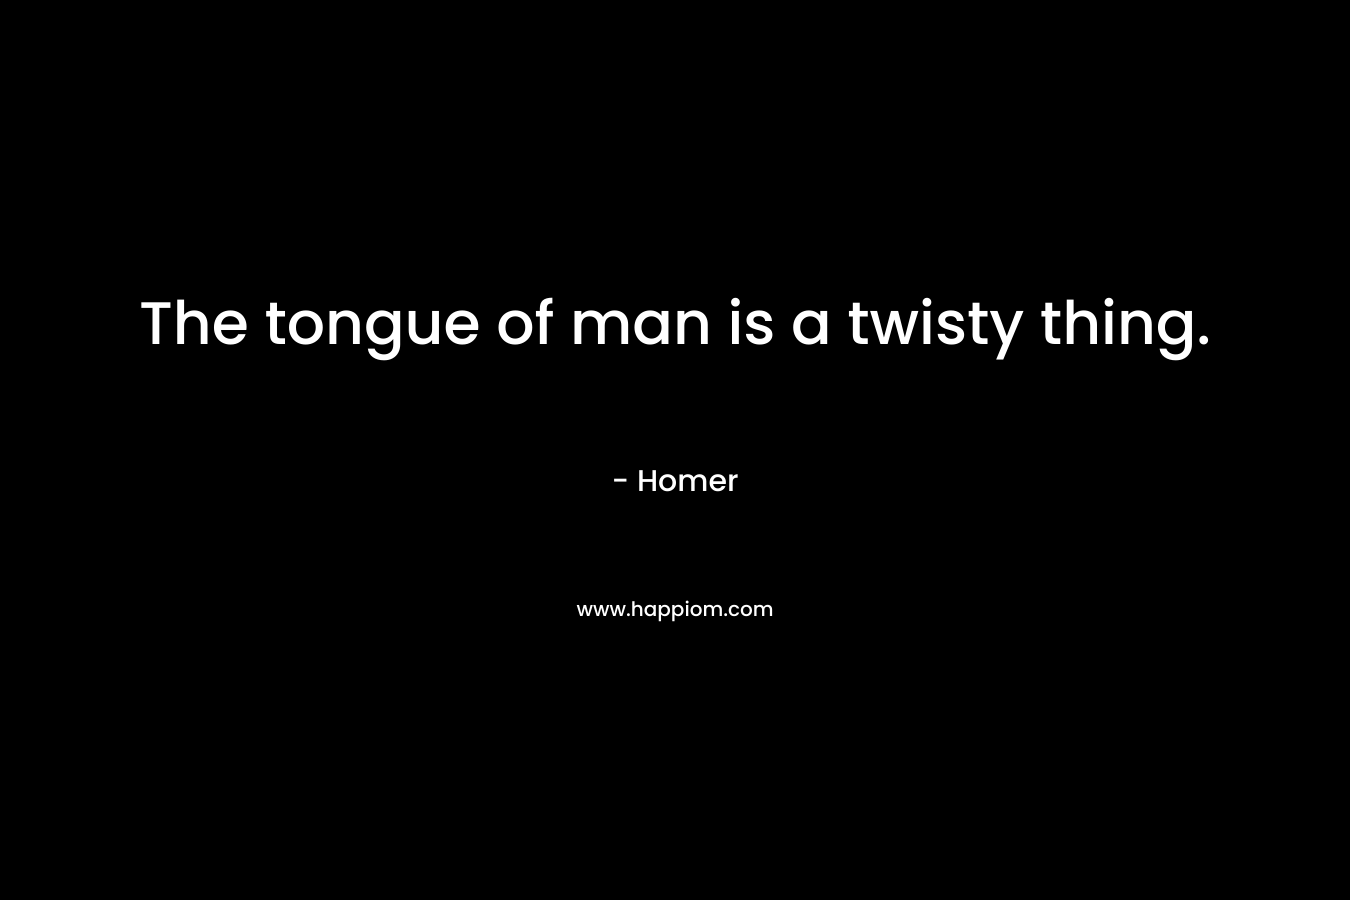 The tongue of man is a twisty thing.